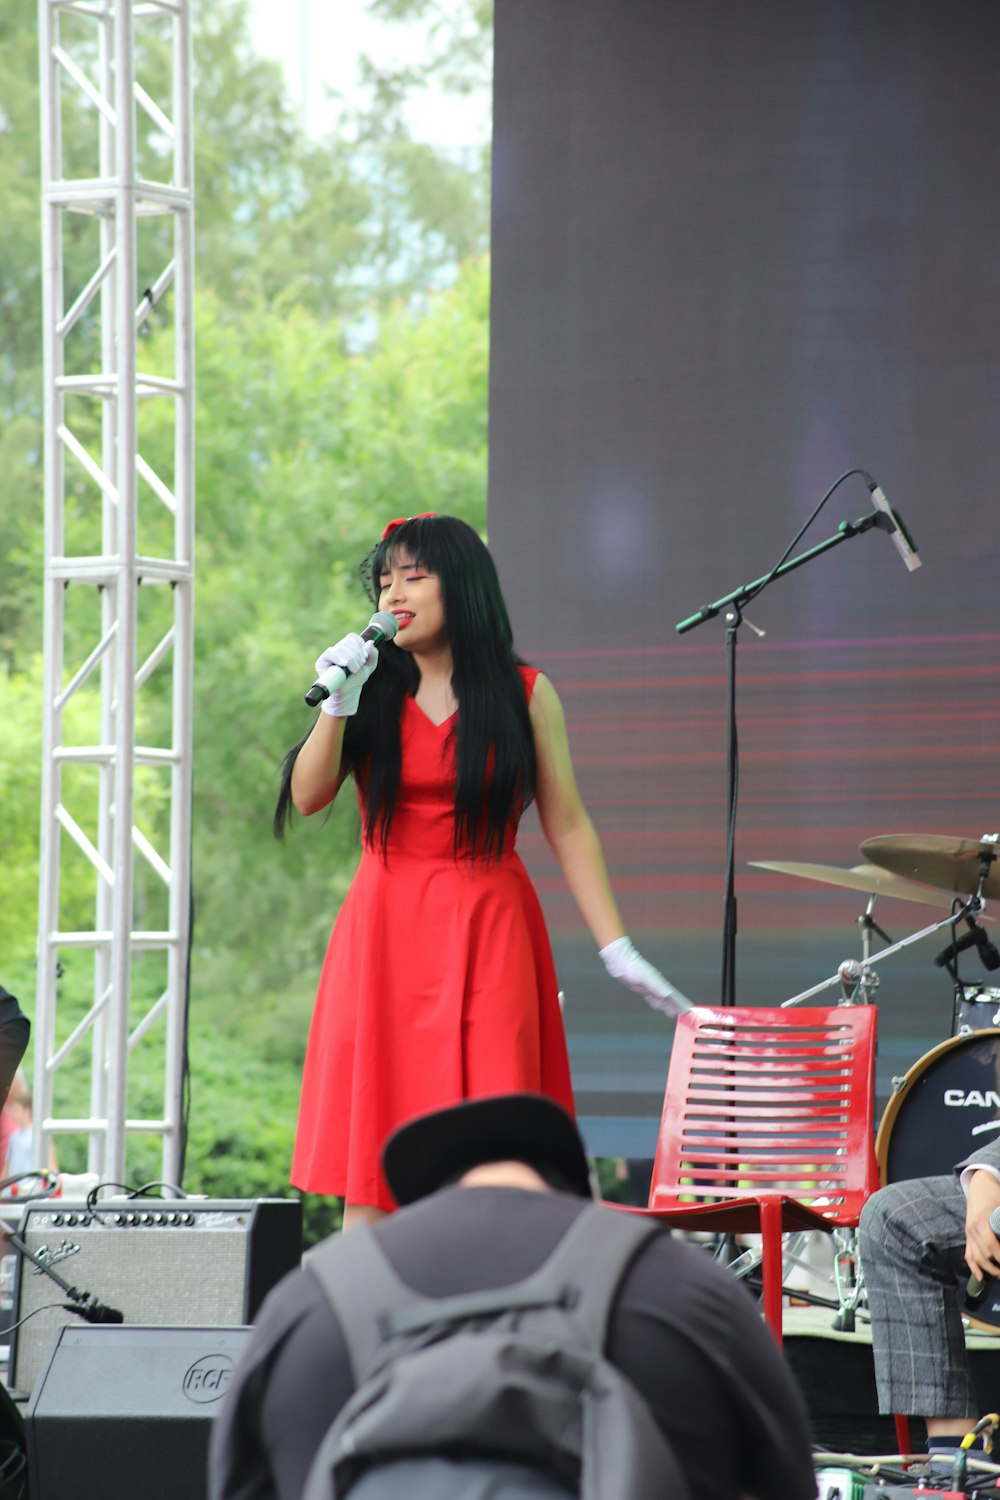 photography of woman singing near stage during daytime